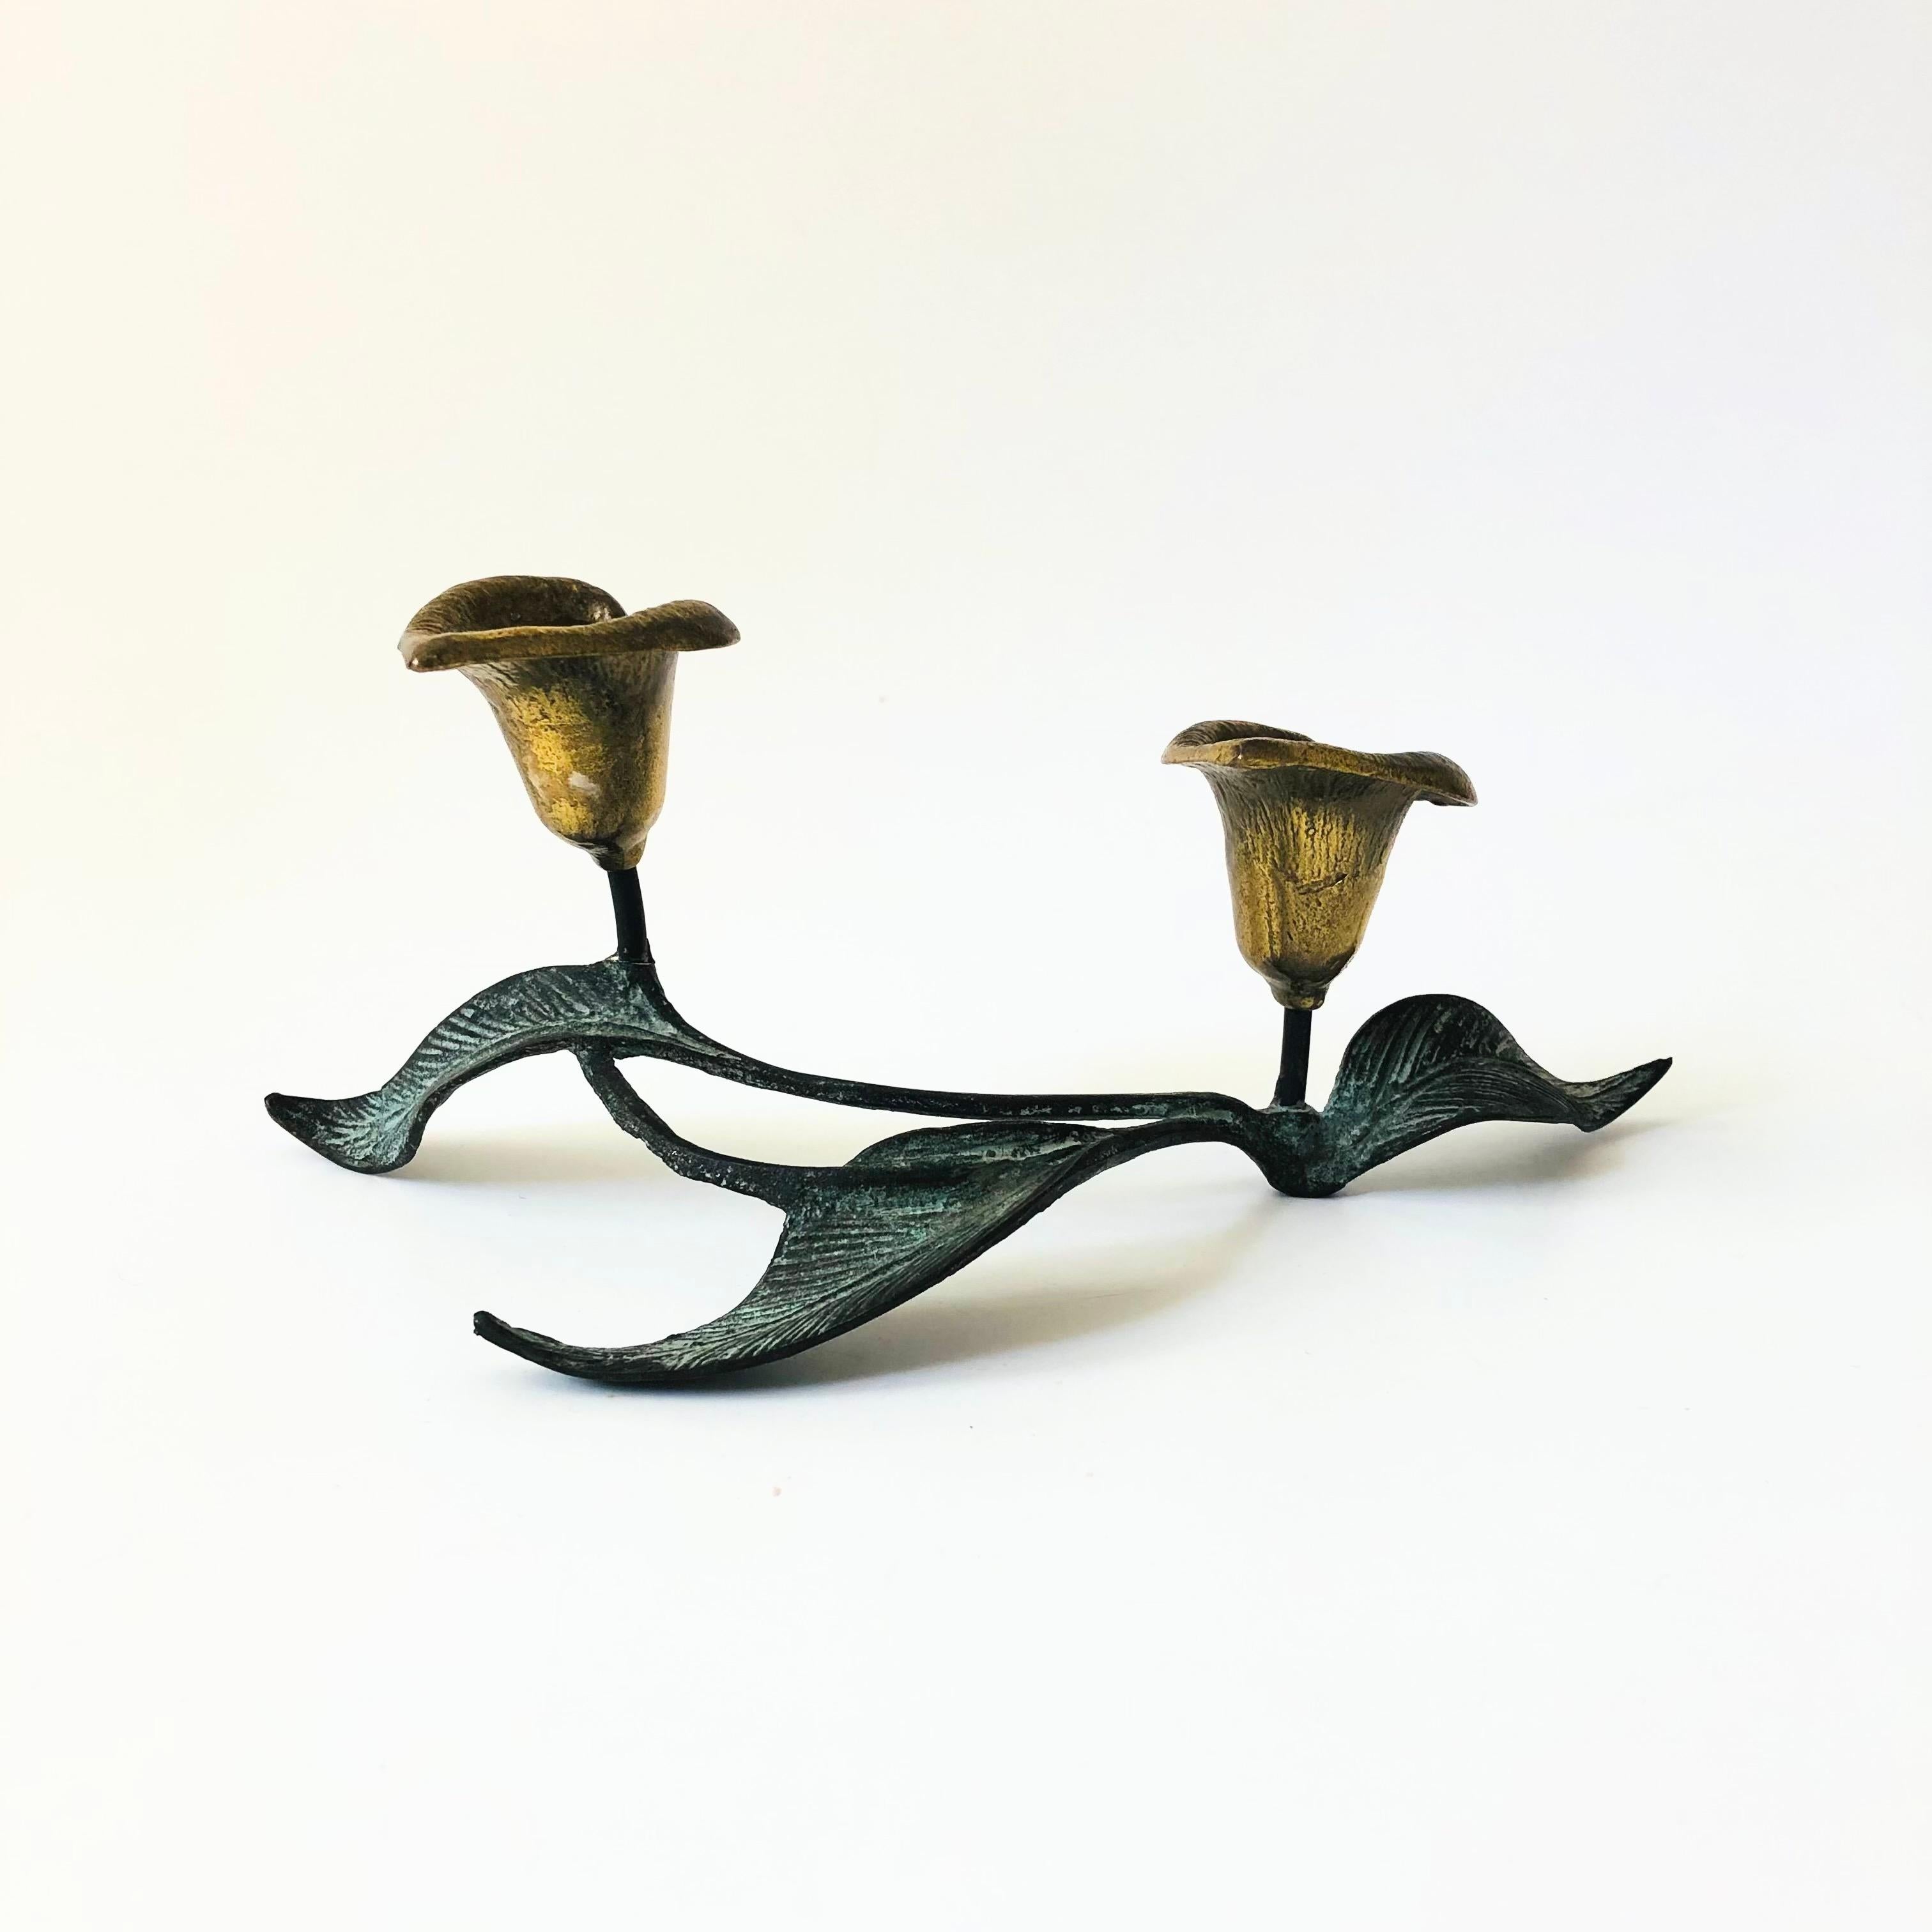 A vintage metal calla lily candle holder. The leaves and stem have been given a wonderful vertigris patina while the lily flowers have been left bright gold. 2 candles can be placed in the brass calla lilies.

